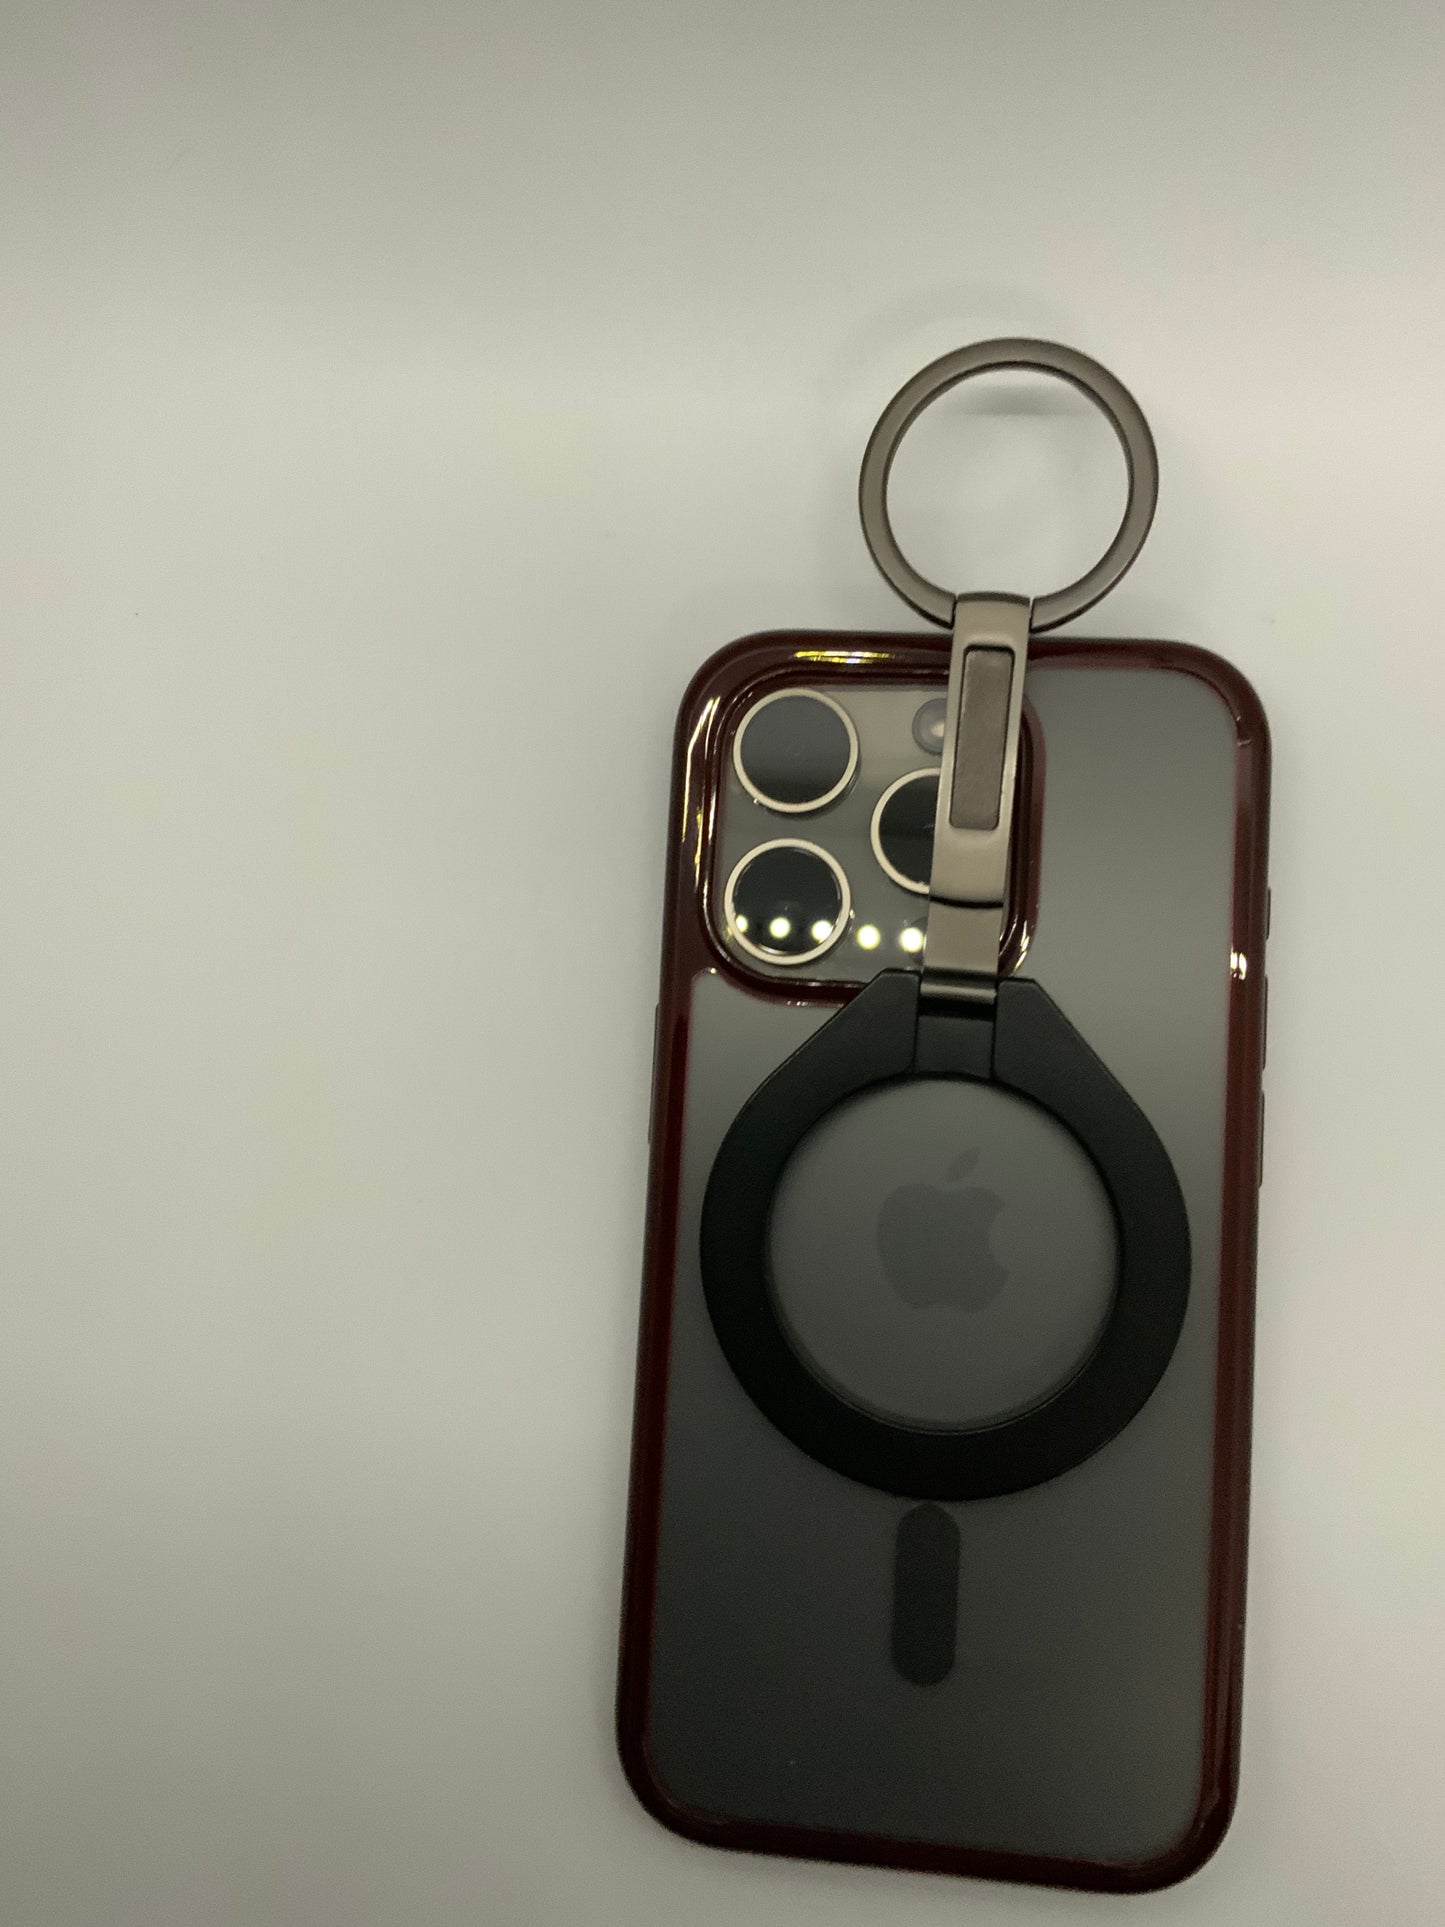 Be My AI: The picture shows a smartphone with a case and an attached accessory. The smartphone case is a deep red color and has a cutout on the back to show the Apple logo, which is centered. Above the Apple logo, there is a large cutout for the camera and flash which are in a square configuration with rounded corners. The camera cutout has three circles for the lenses and a smaller circle for the flash.

Attached to the top of the smartphone case is a circular accessory with a ring. The accessory is attach